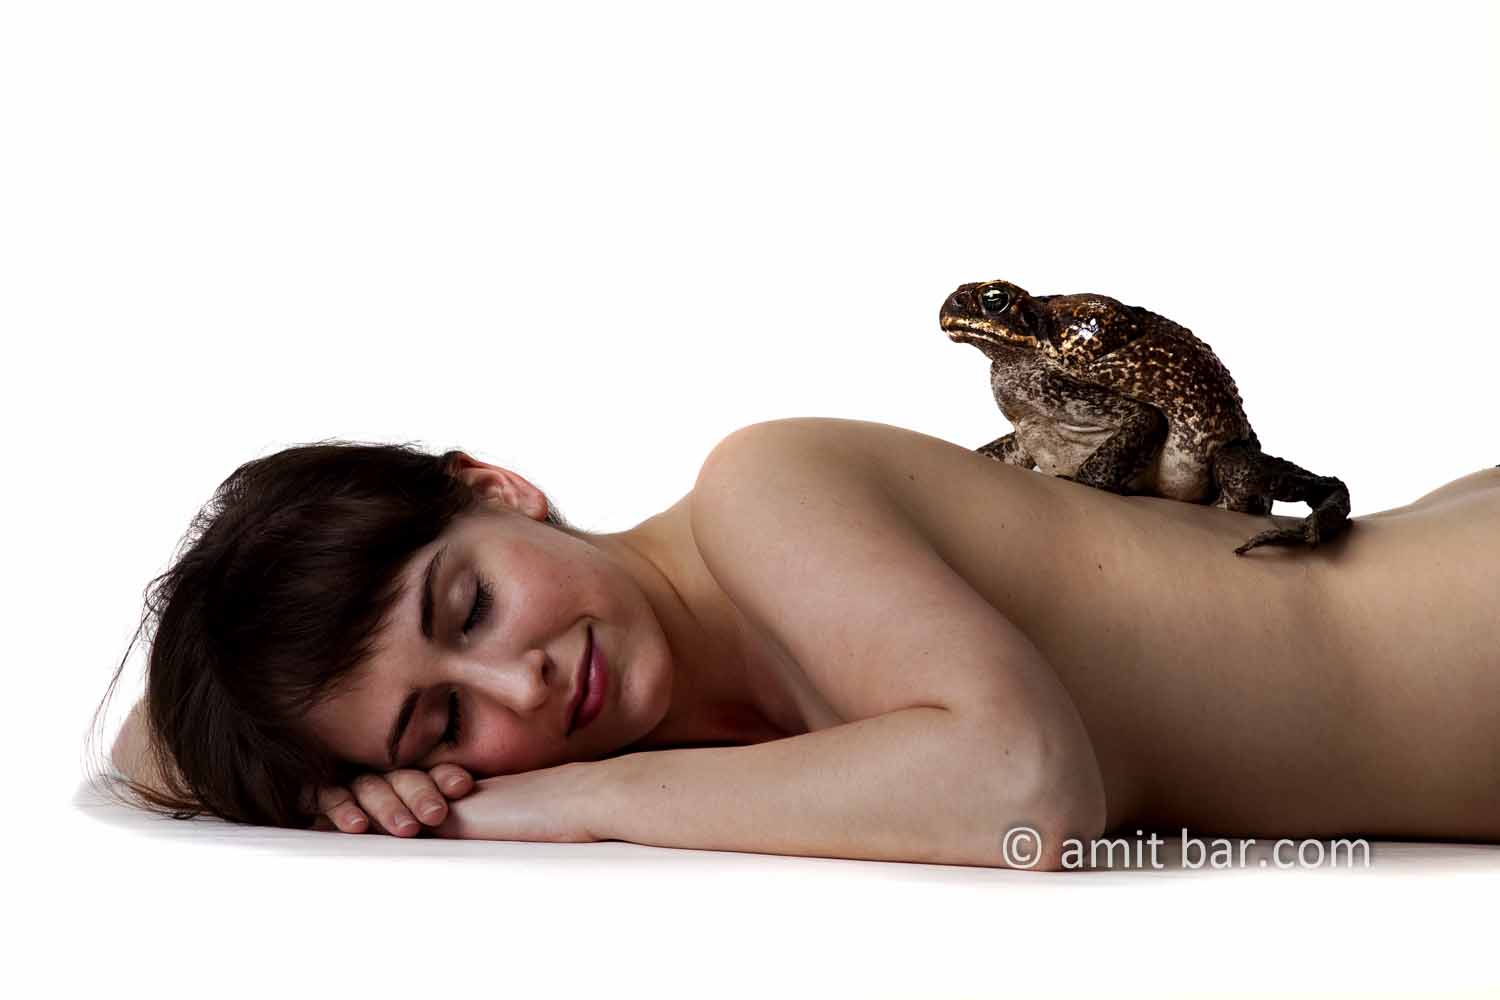 Giant toad: Giant toad on the back of a nude model